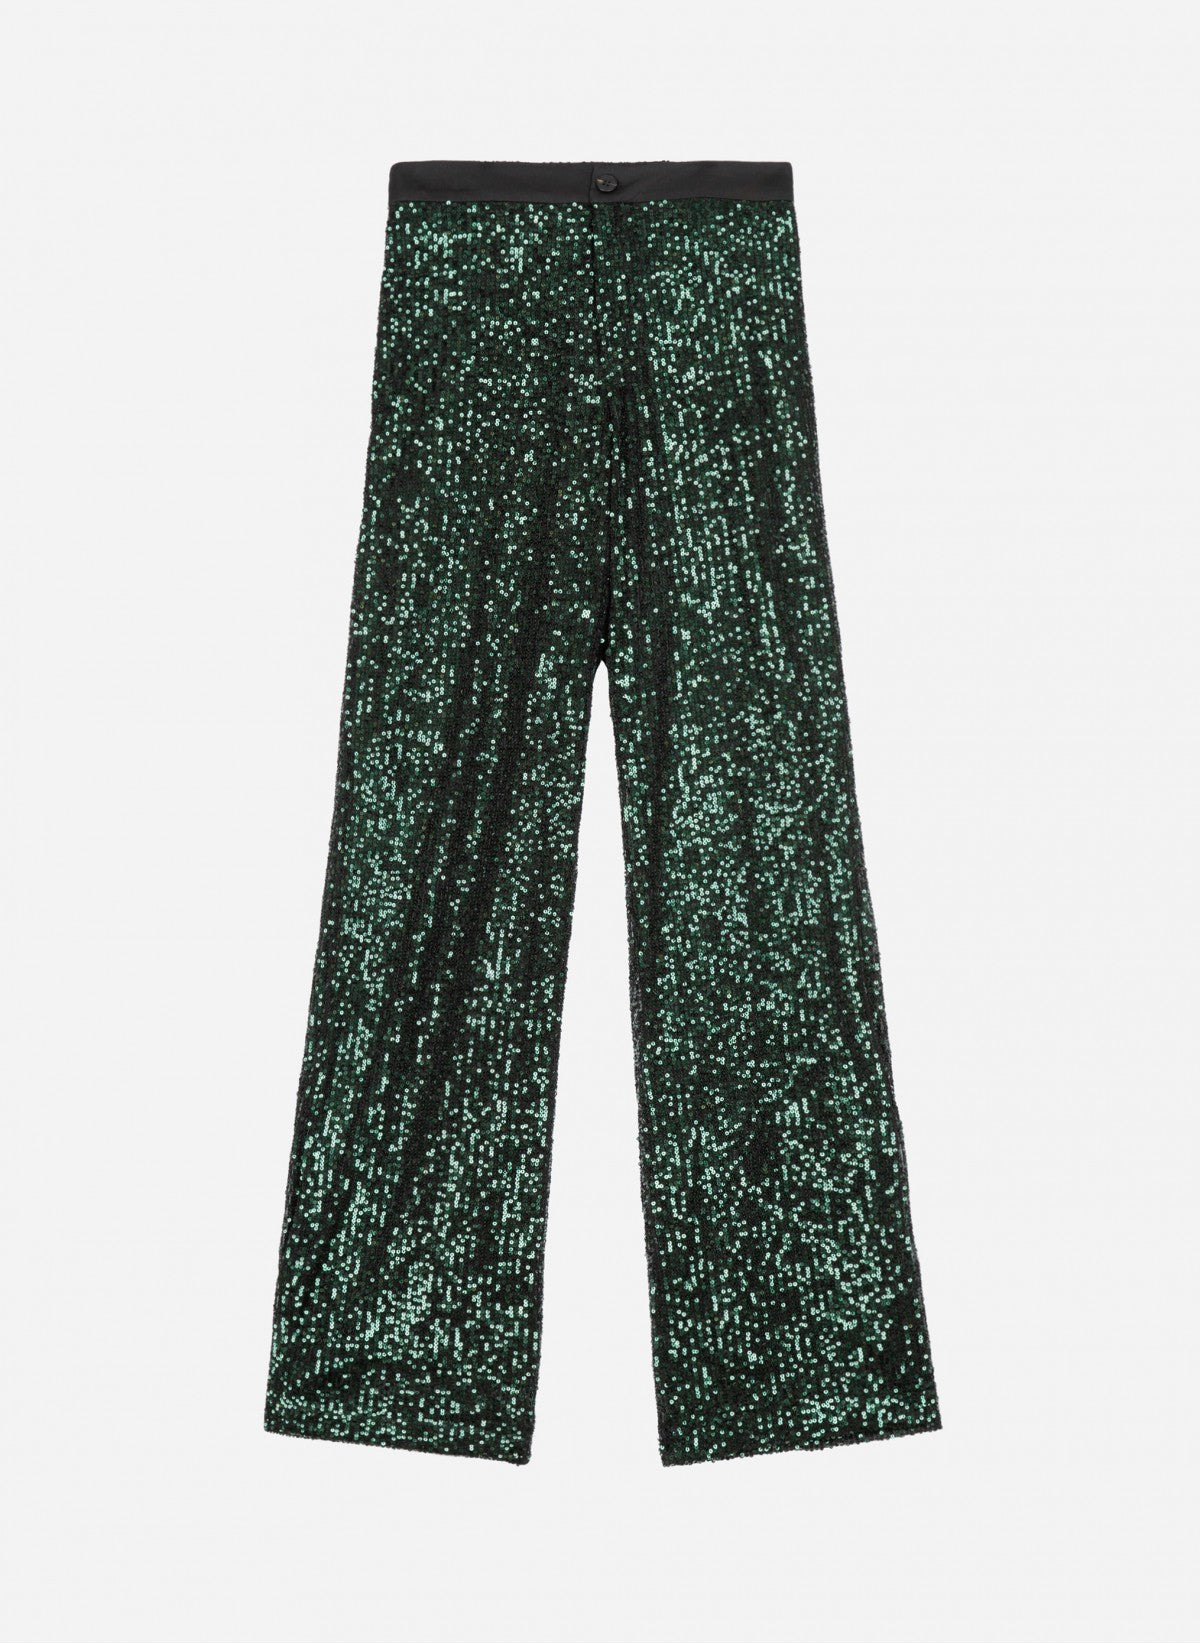 Sequin trousers in forest green